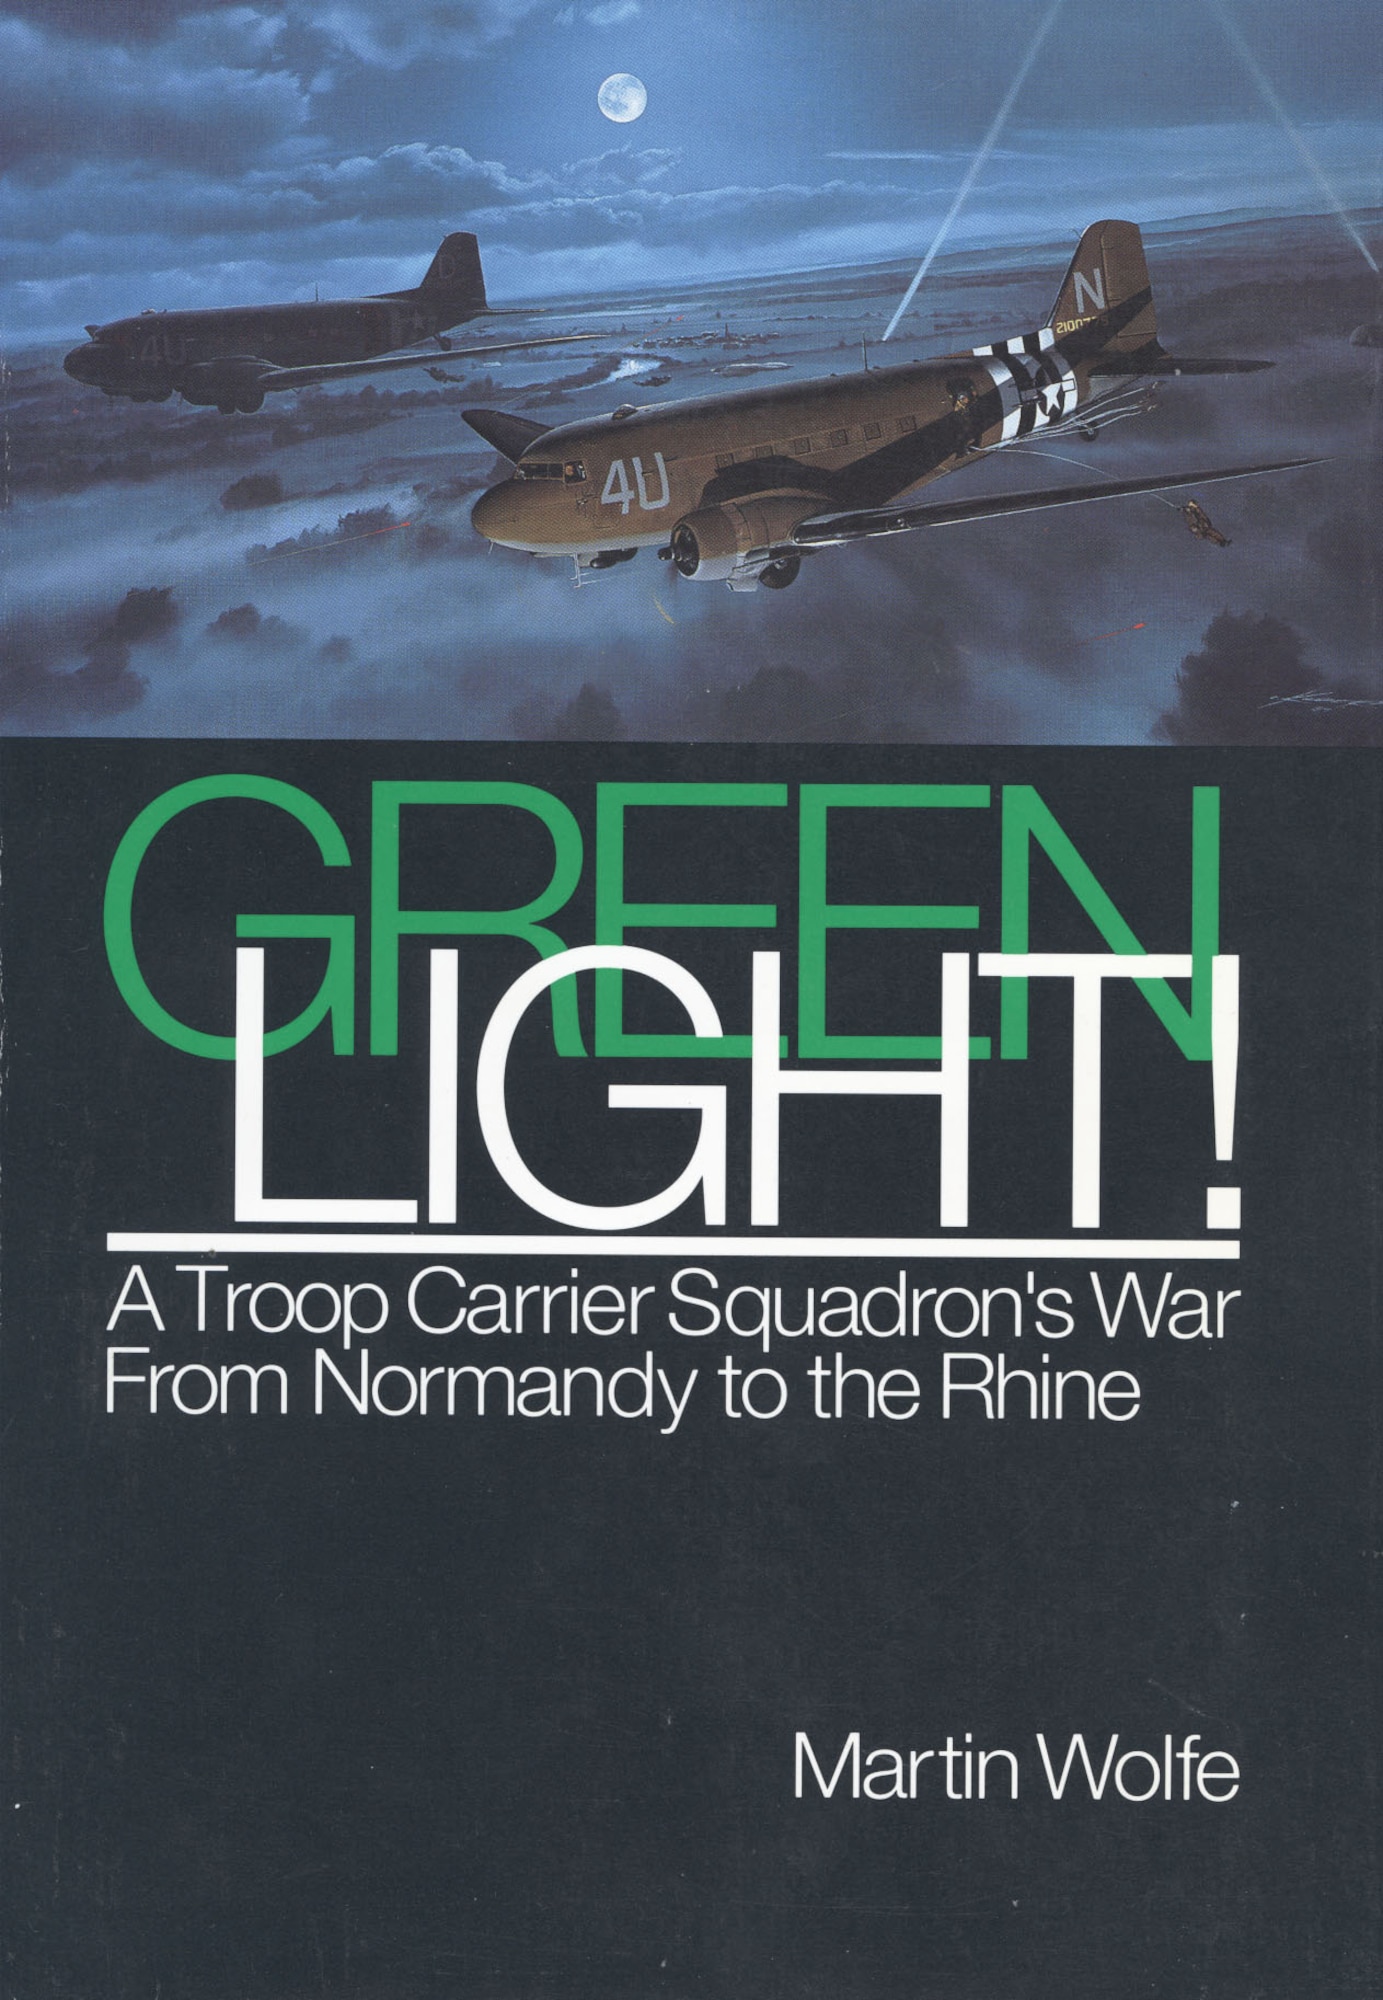 Green Light! A Troop Carrier Squadron's War From Normandy to the Rhine by Martin Wolfe.